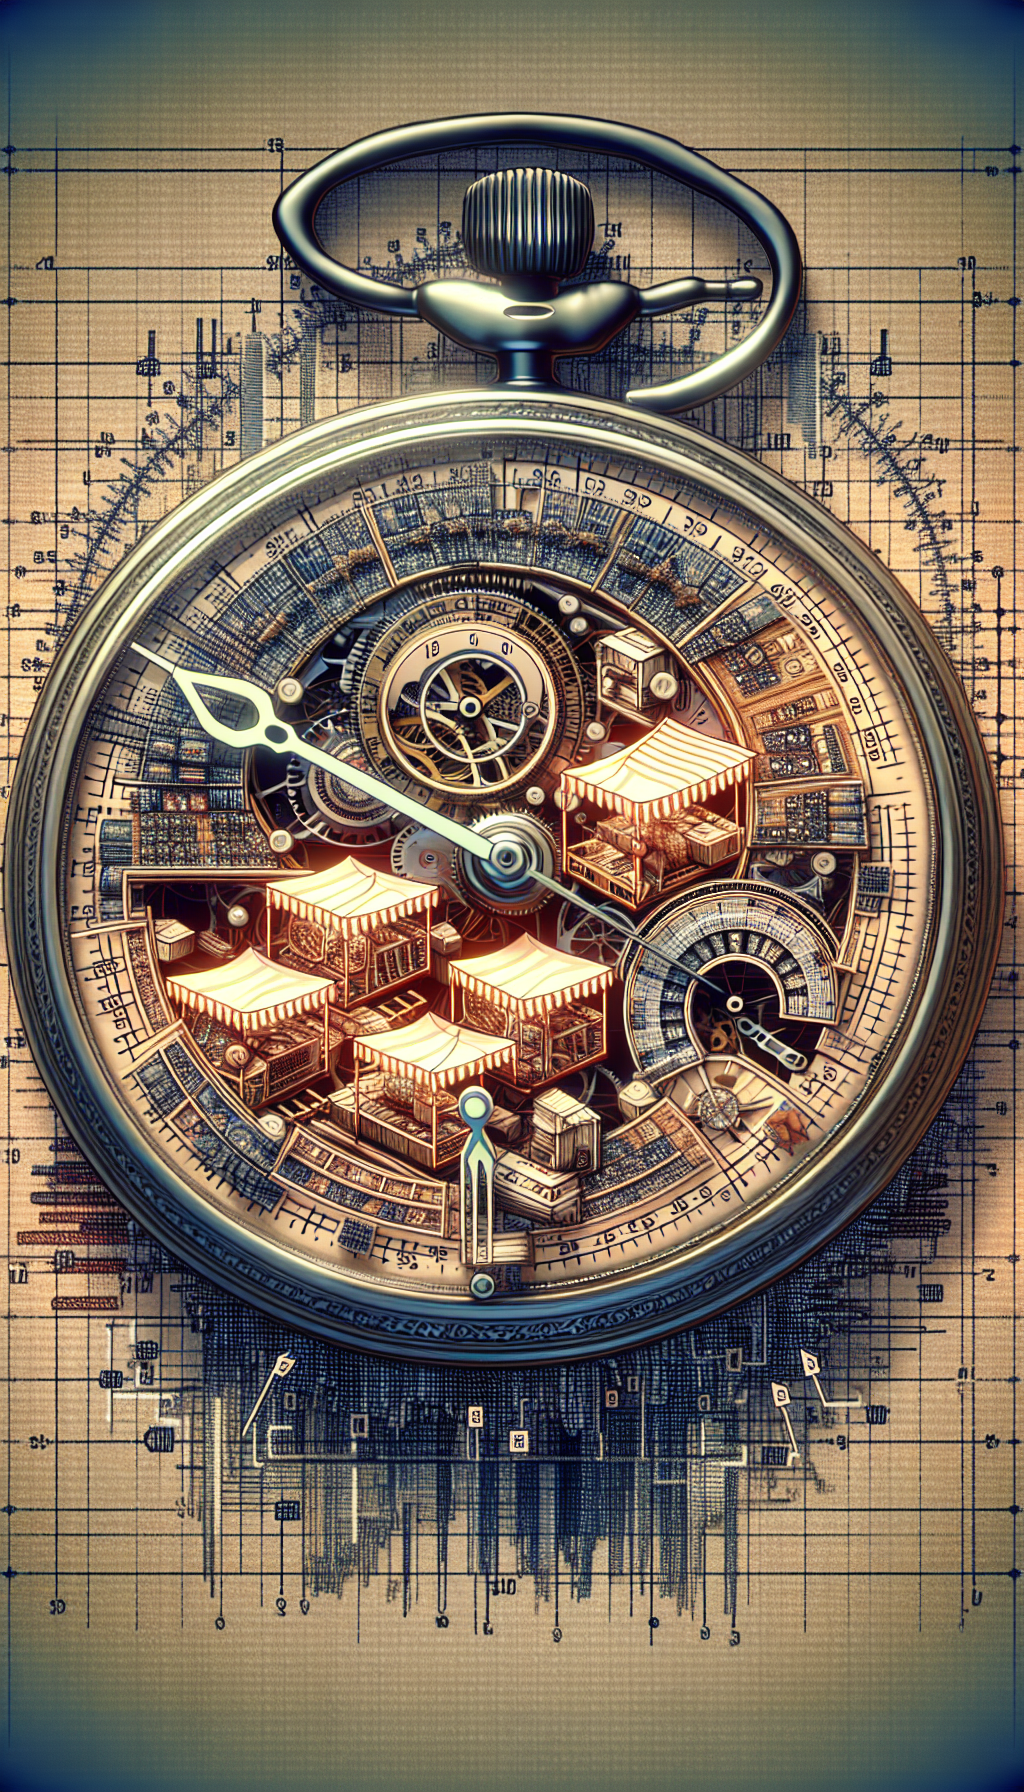 The illustration depicts an antique pocket watch with its gears artistically transformed into a vibrant marketplace scene. The hands of the watch point to different stalls, each representing key factors of rarity and demand. A transparent overlay of fluctuating graphs and numbers weaves through the market, symbolizing the dynamic value of these timeless pieces.